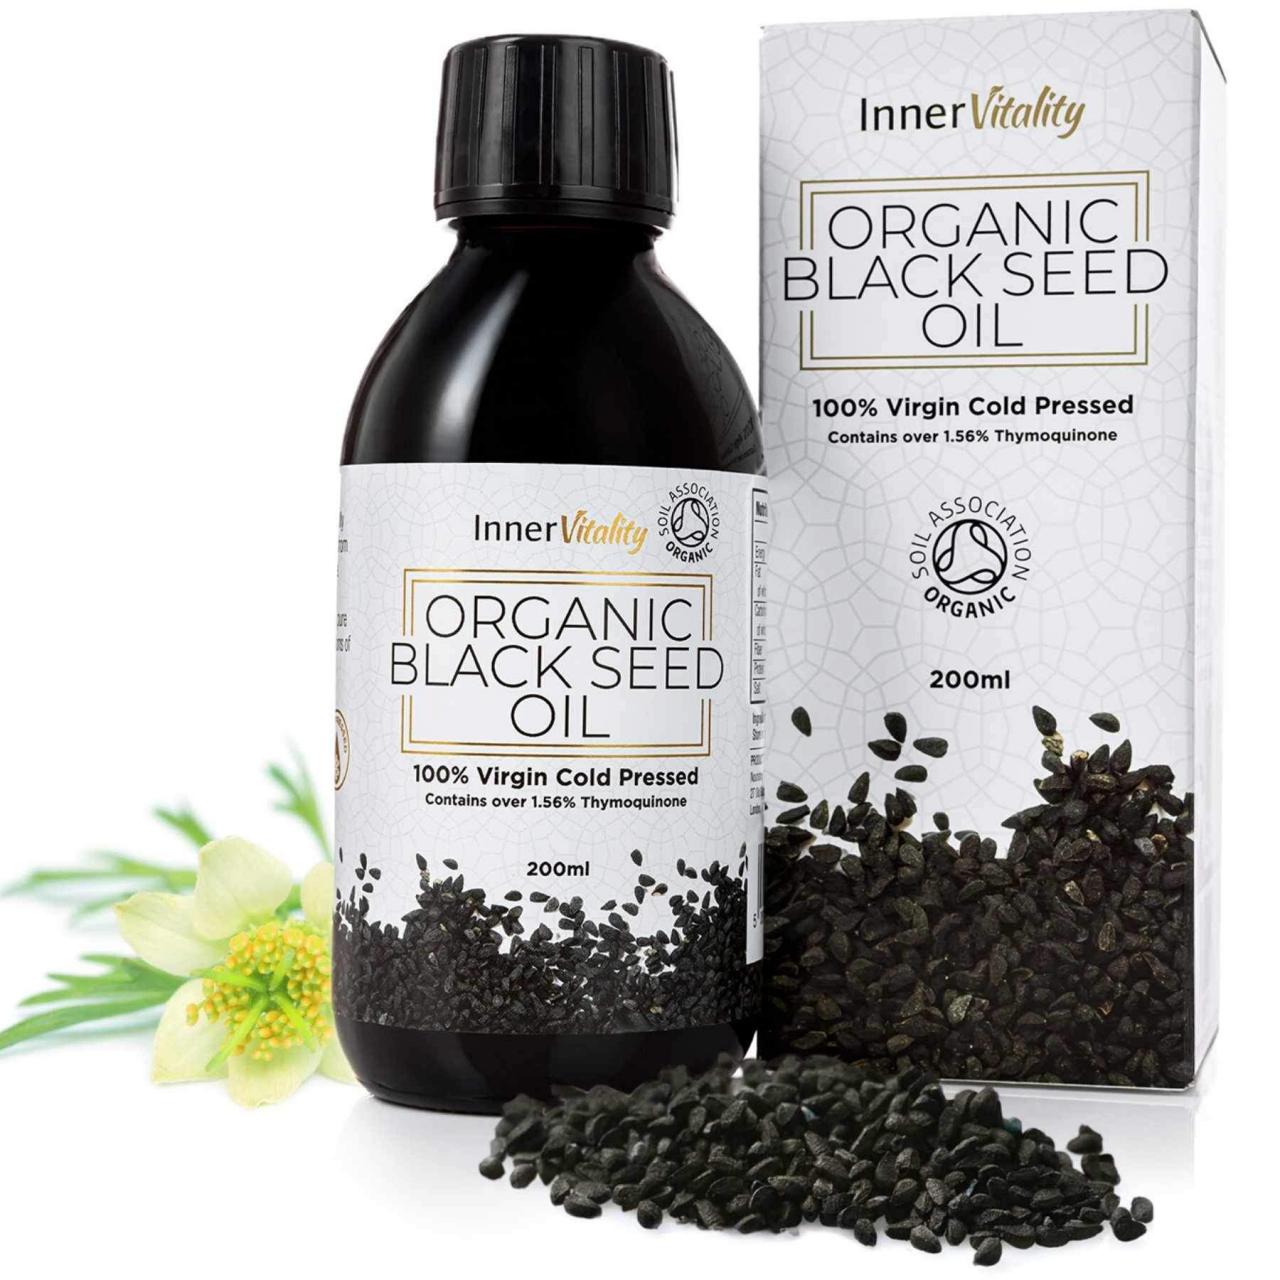 Black Seed Oil, A Natural Remedy for Radiant Skin